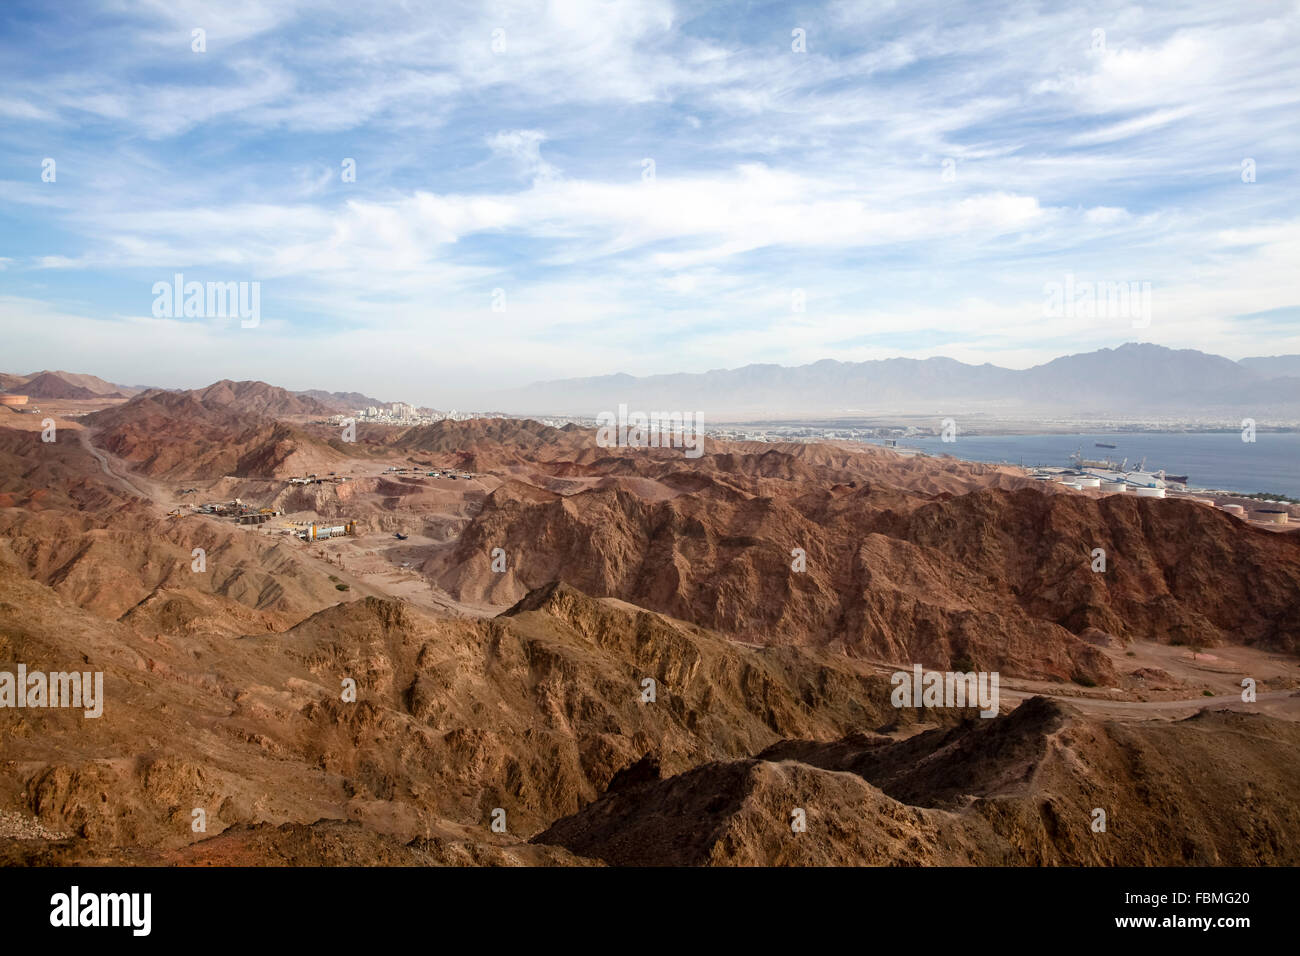 The colourful Eilat mountain range The gulf of Aqaba in the background Stock Photo